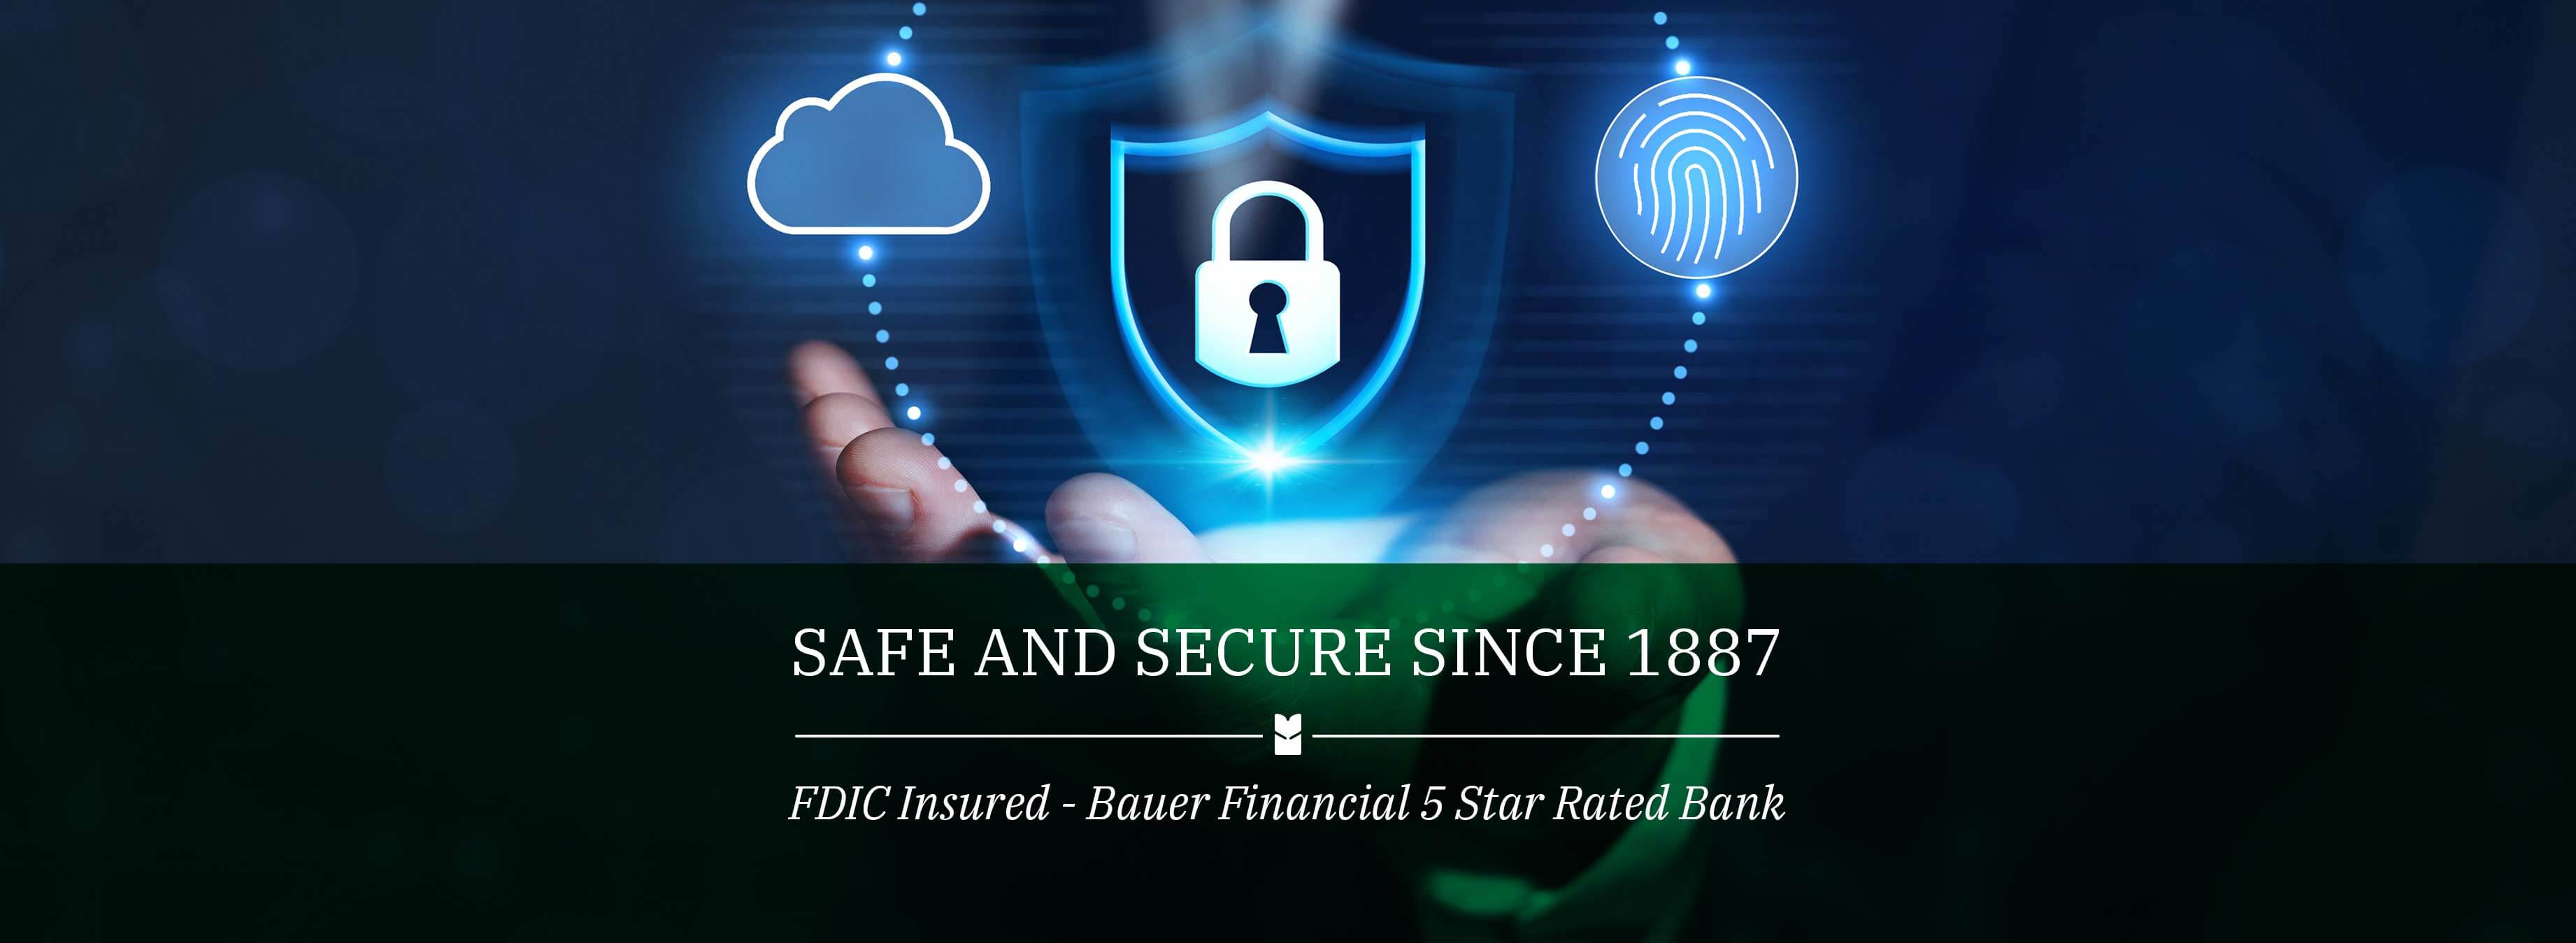 Safe and Secure since 1887. FDIC Insured - Bauer financial 5 star rated bank